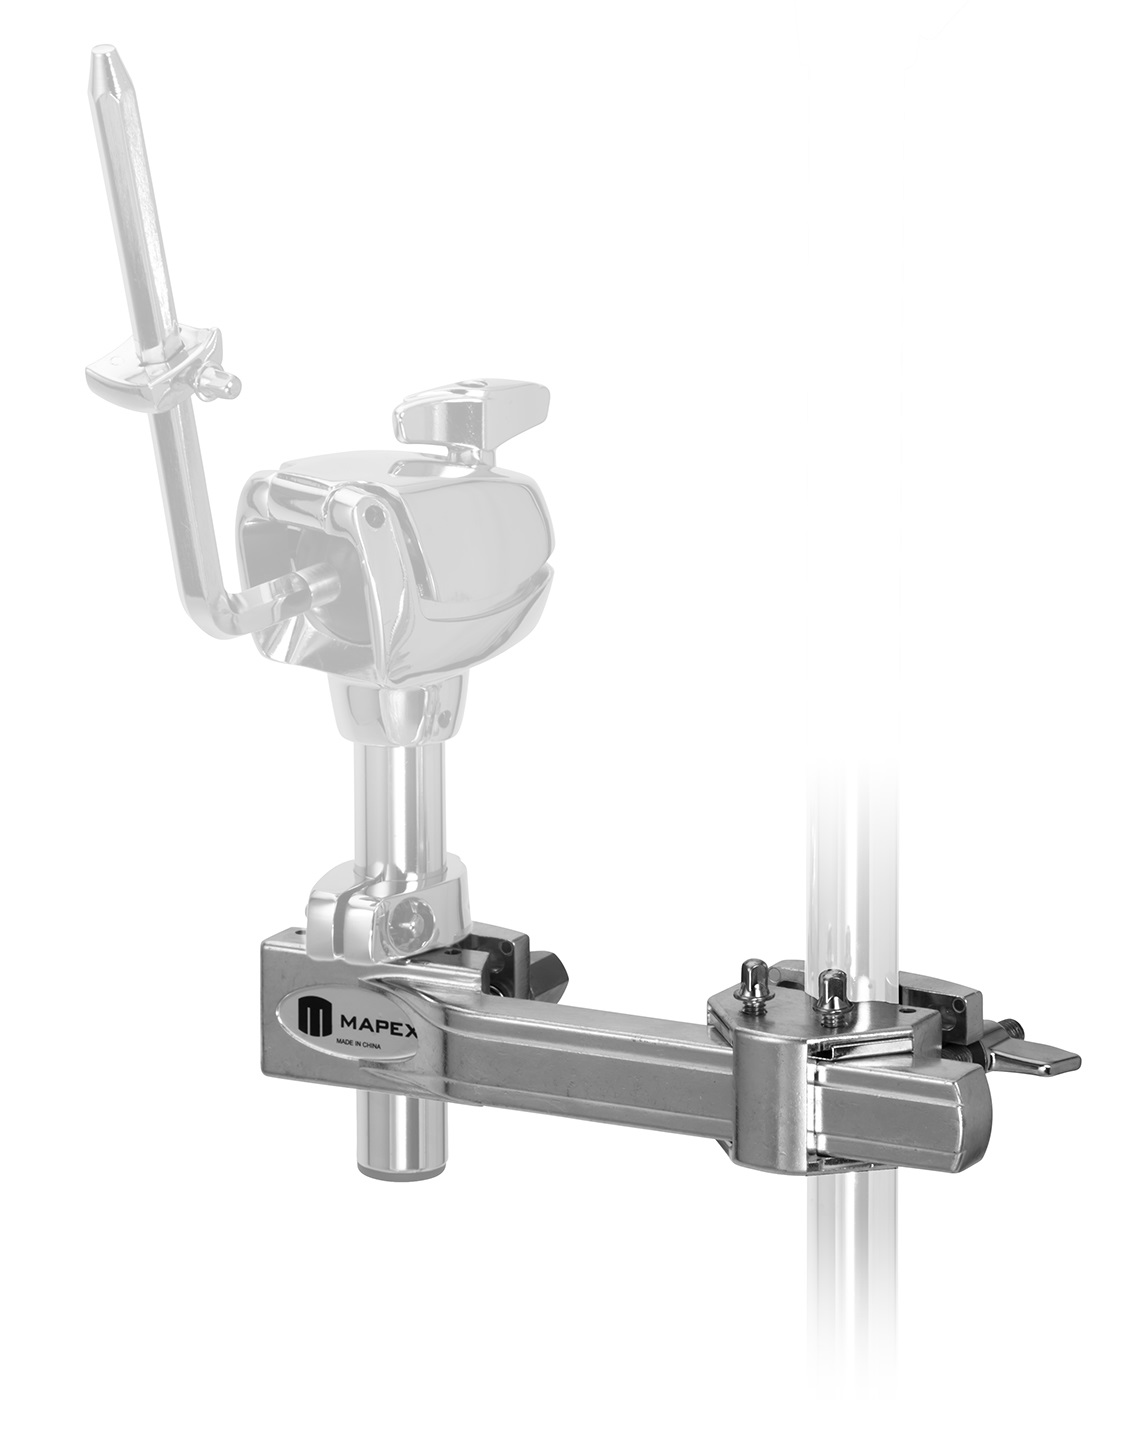 An image of Mapex MC910 Multi-Purpose Clamp | PMT Online